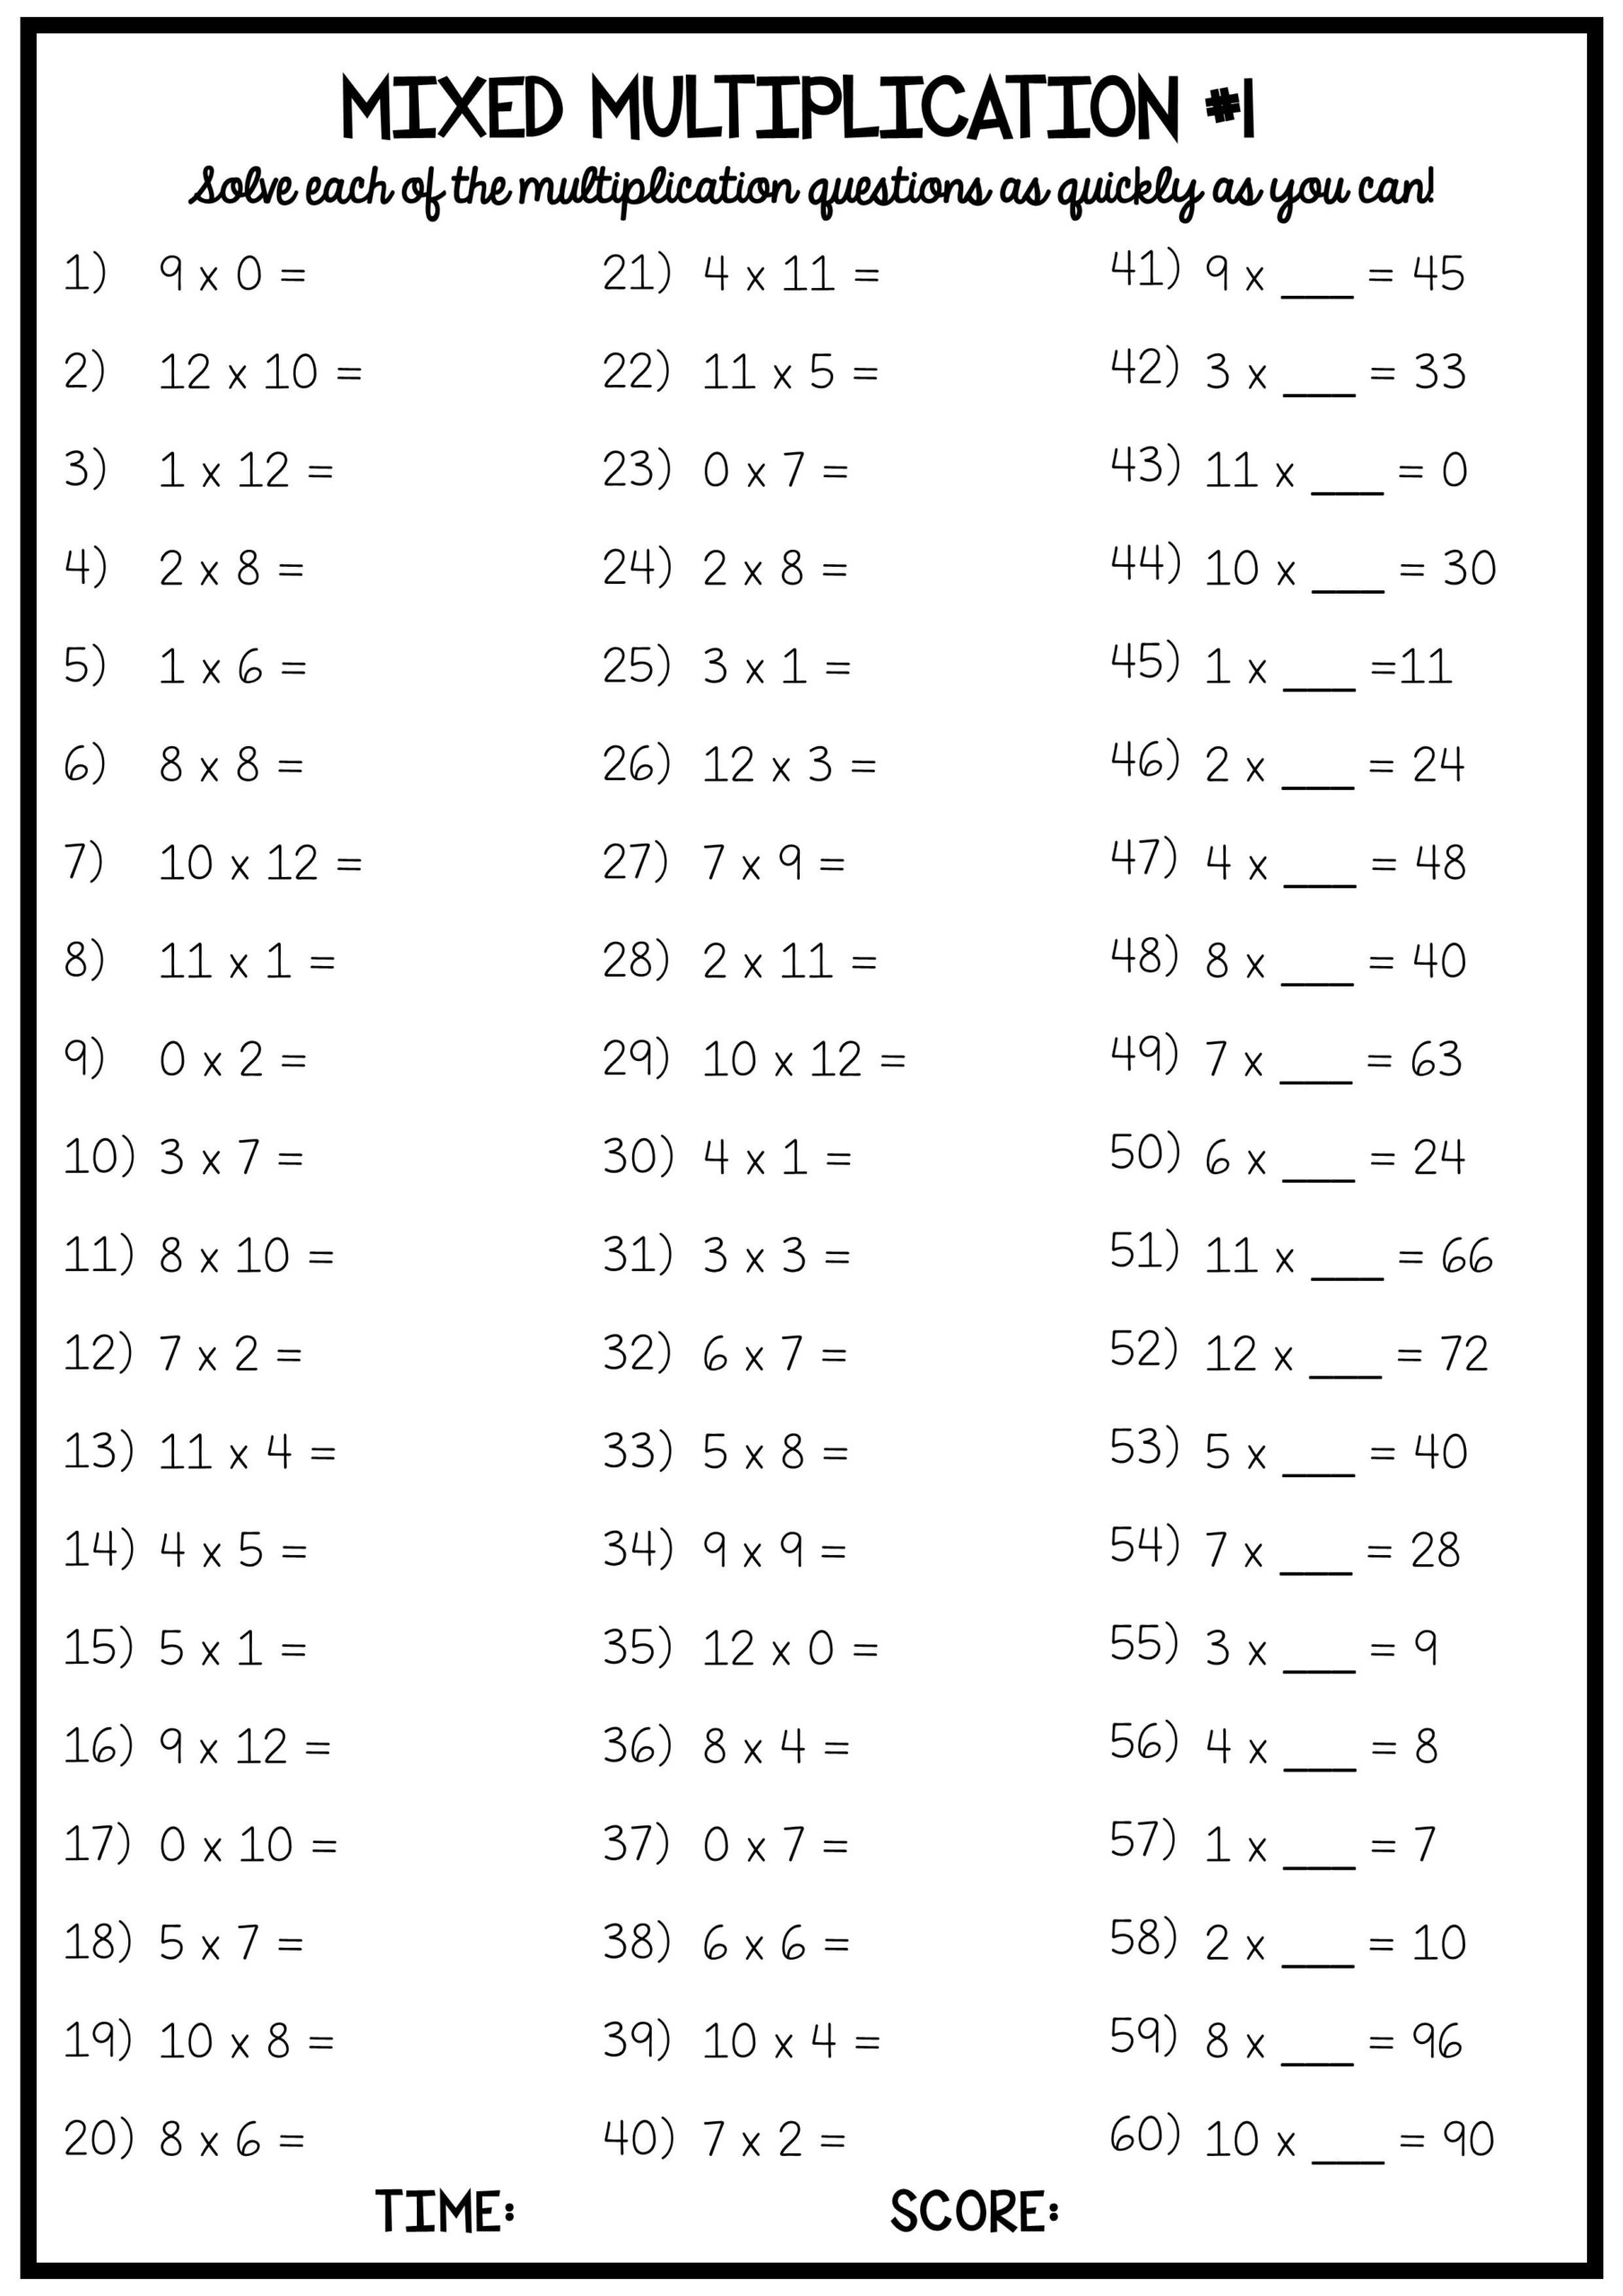 20 Worksheets For Students To Complete The Multiplication for Multiplication Worksheets 60 Problems